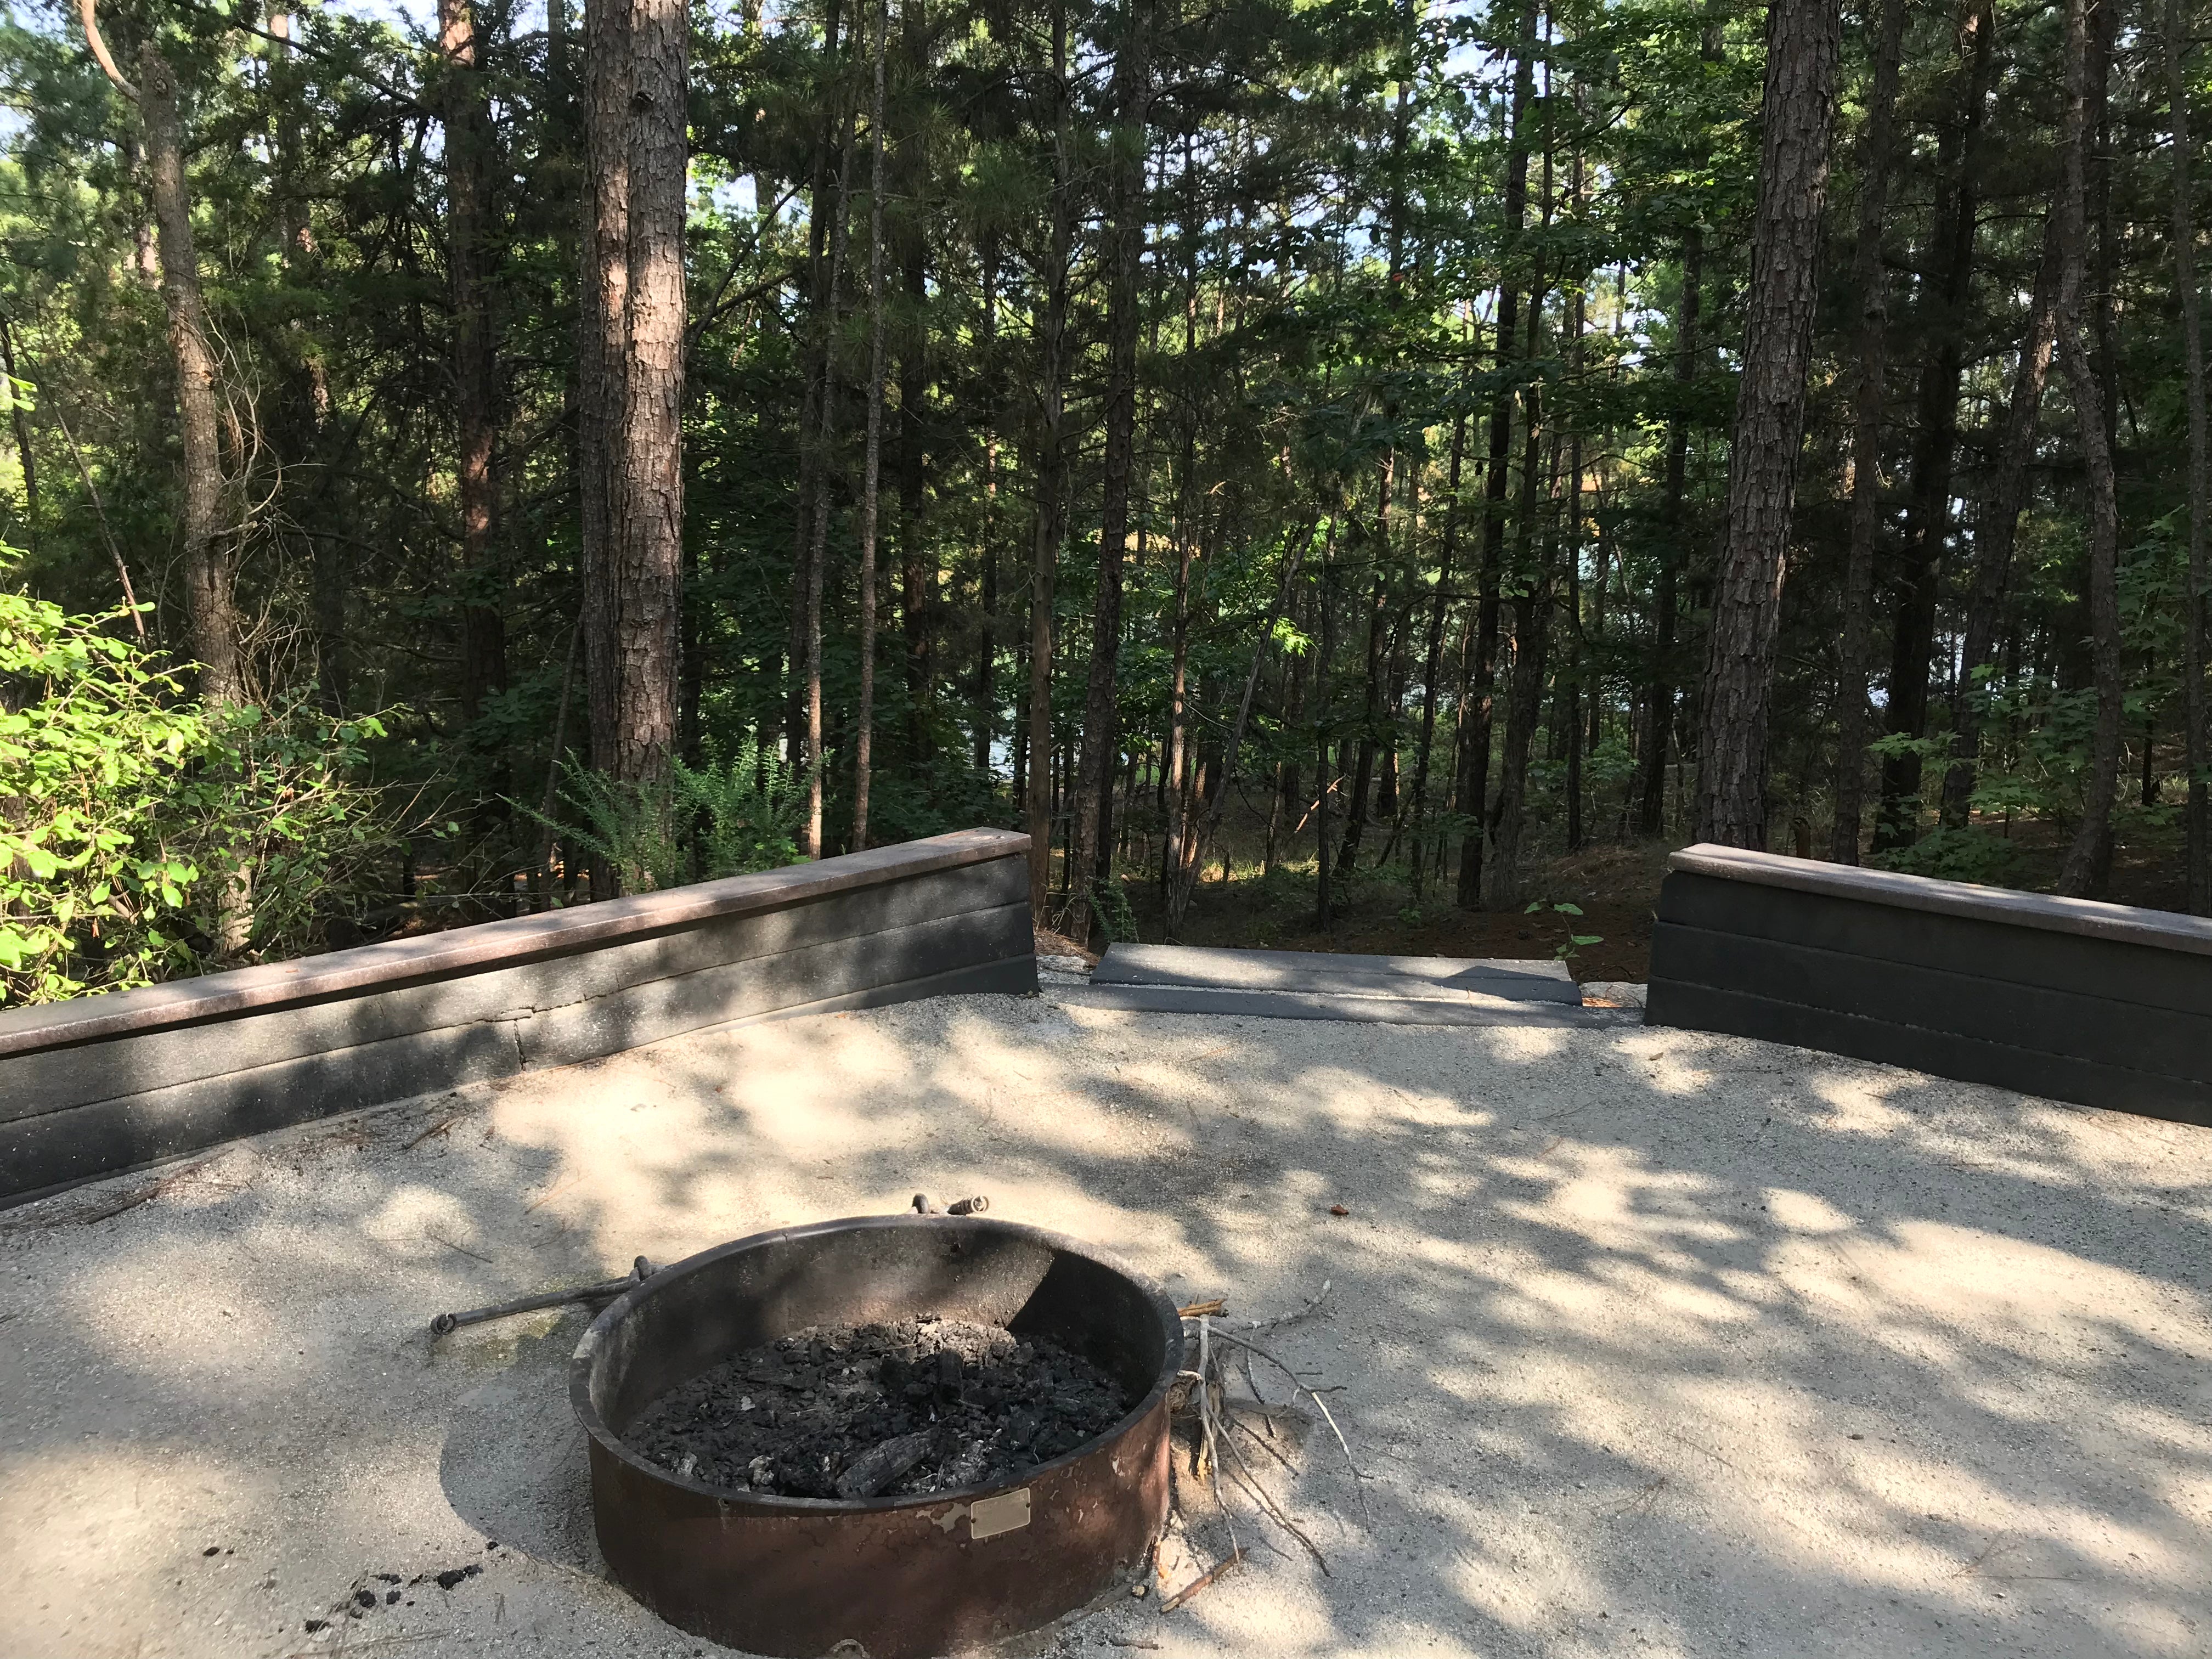 Behind the fire pit is the path to the lake